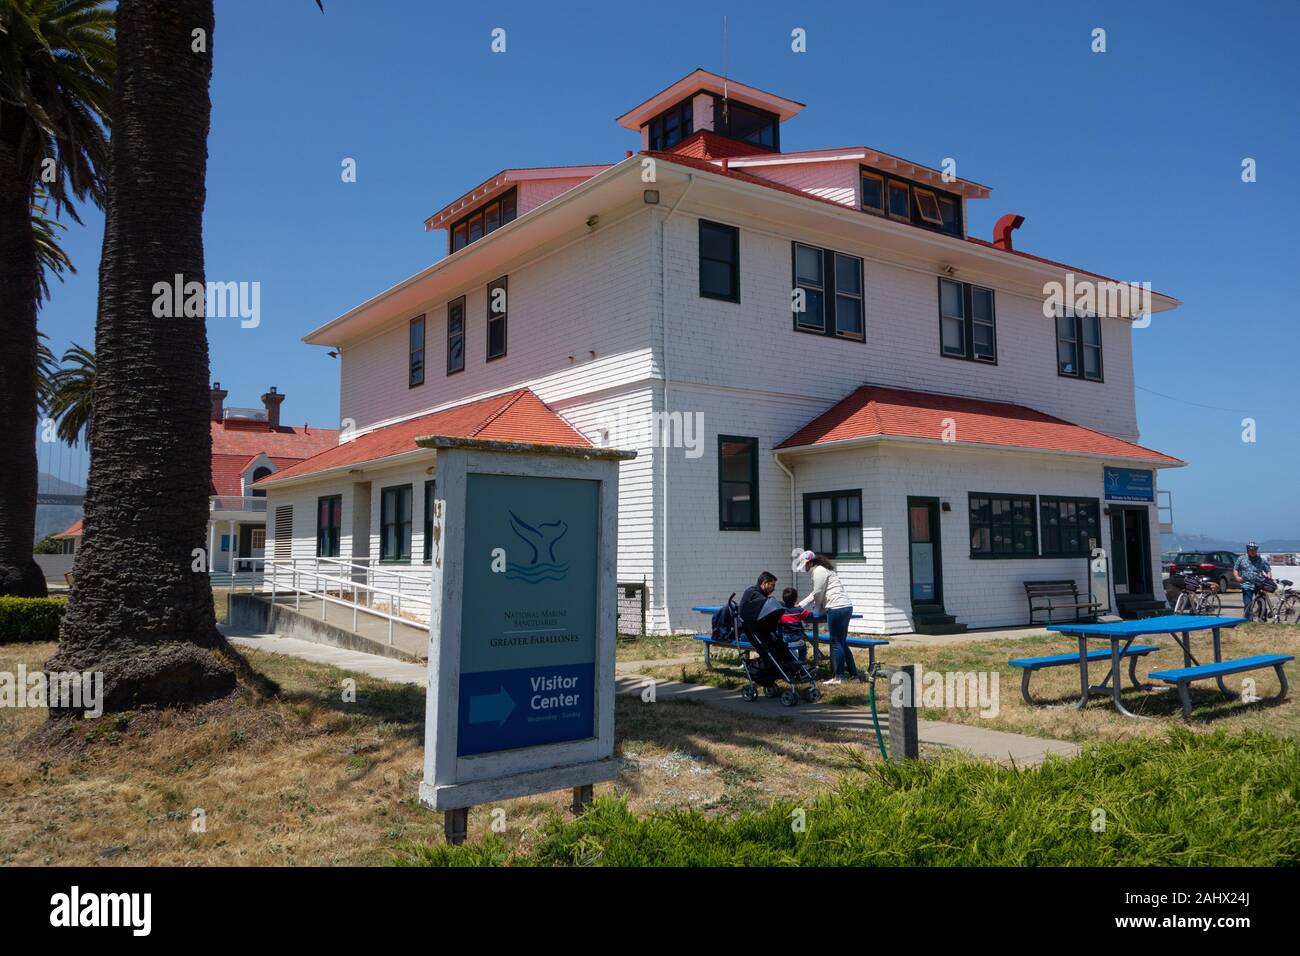 The Visitor Center for the Greater Farallones National Marine Sanctuary, located in Crissy Field, in the Presidio. Stock Photo